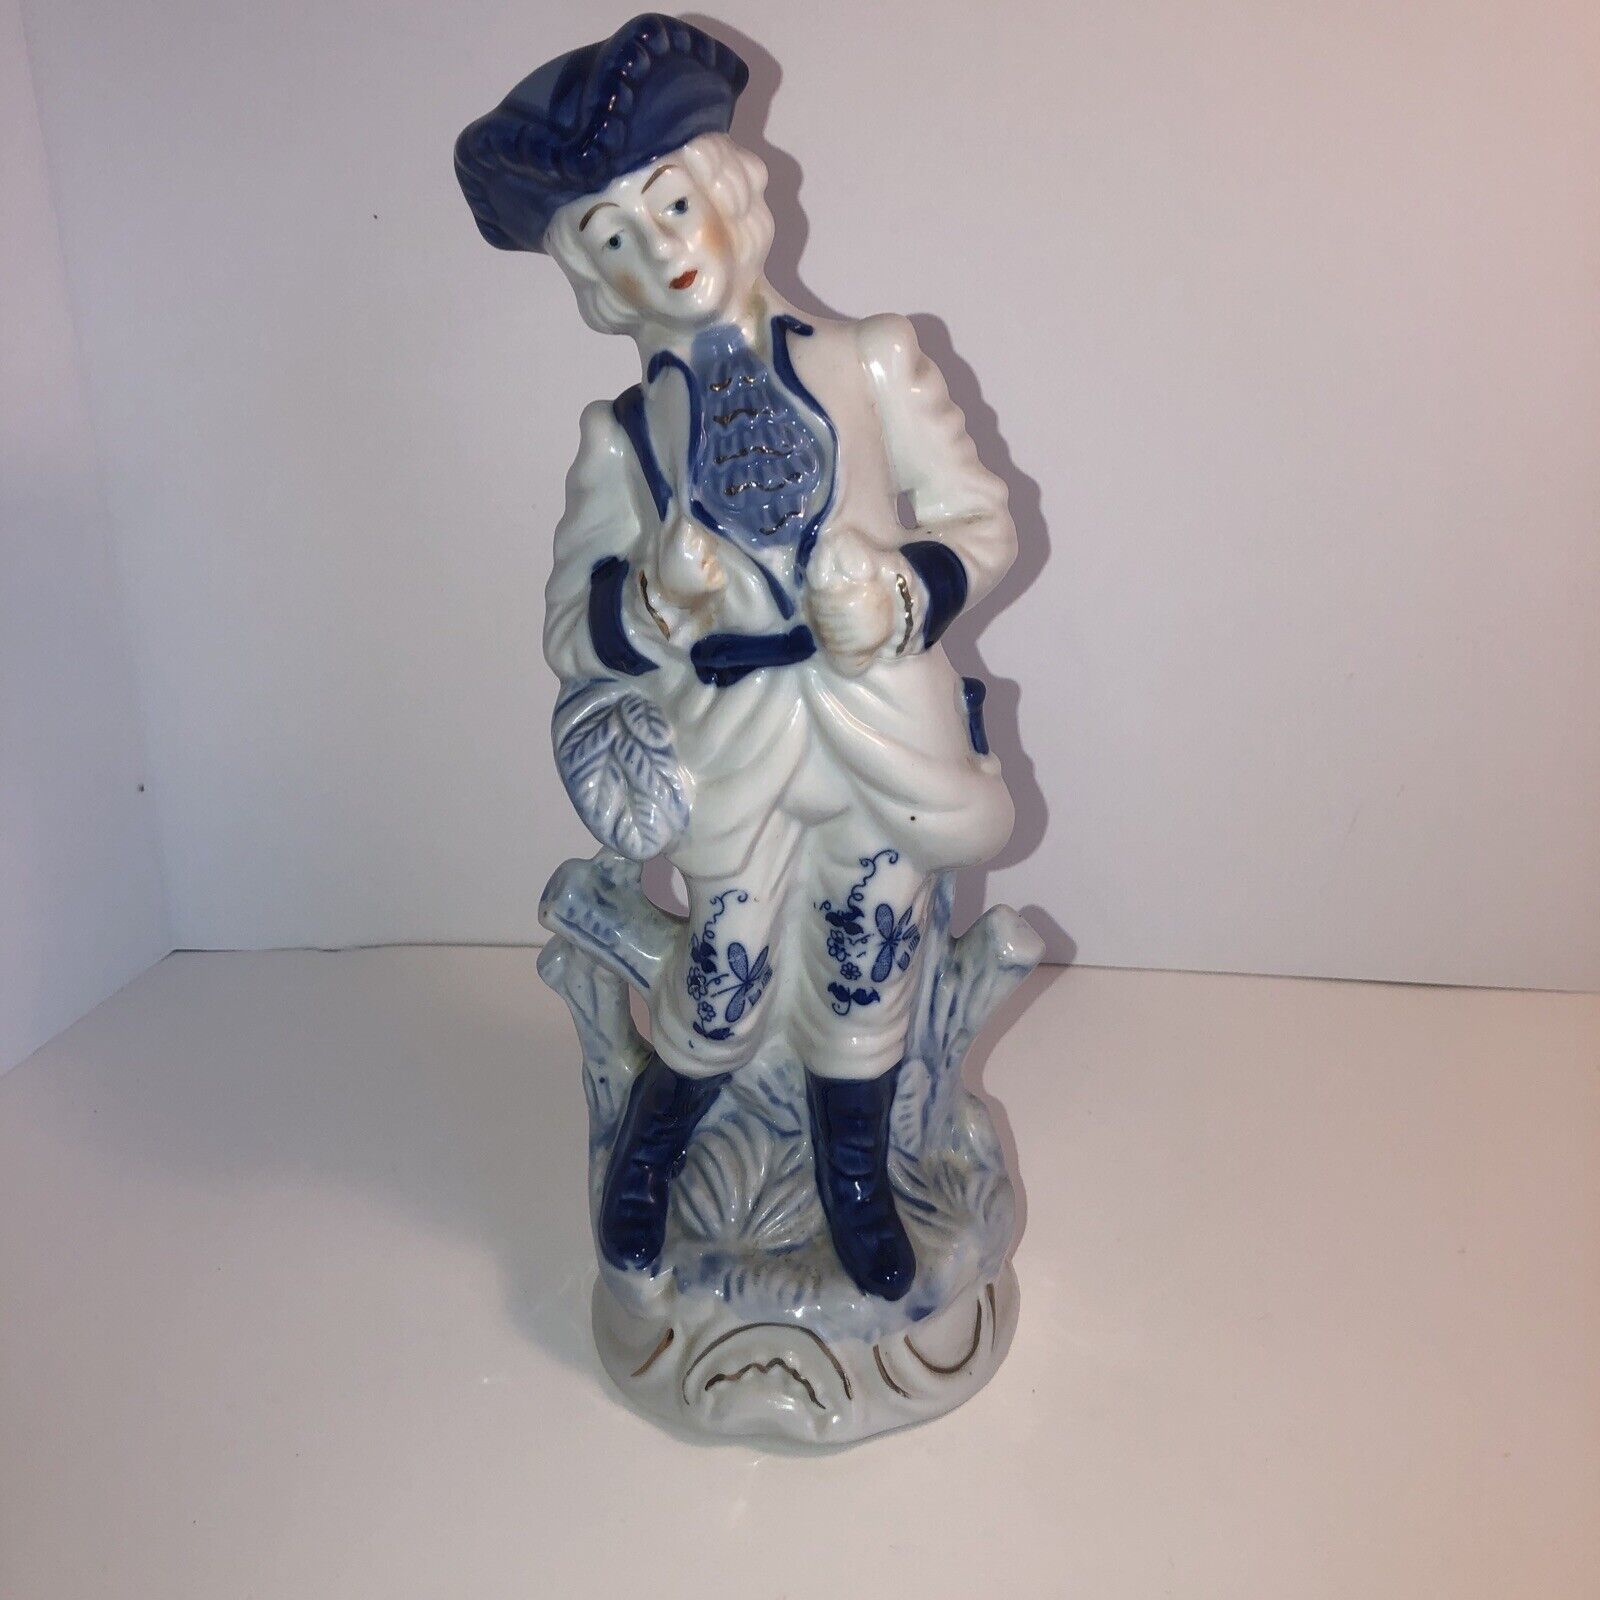 Colonial Blue Delft Style Vintage Porcelain Figurines Man 11-12 Inches